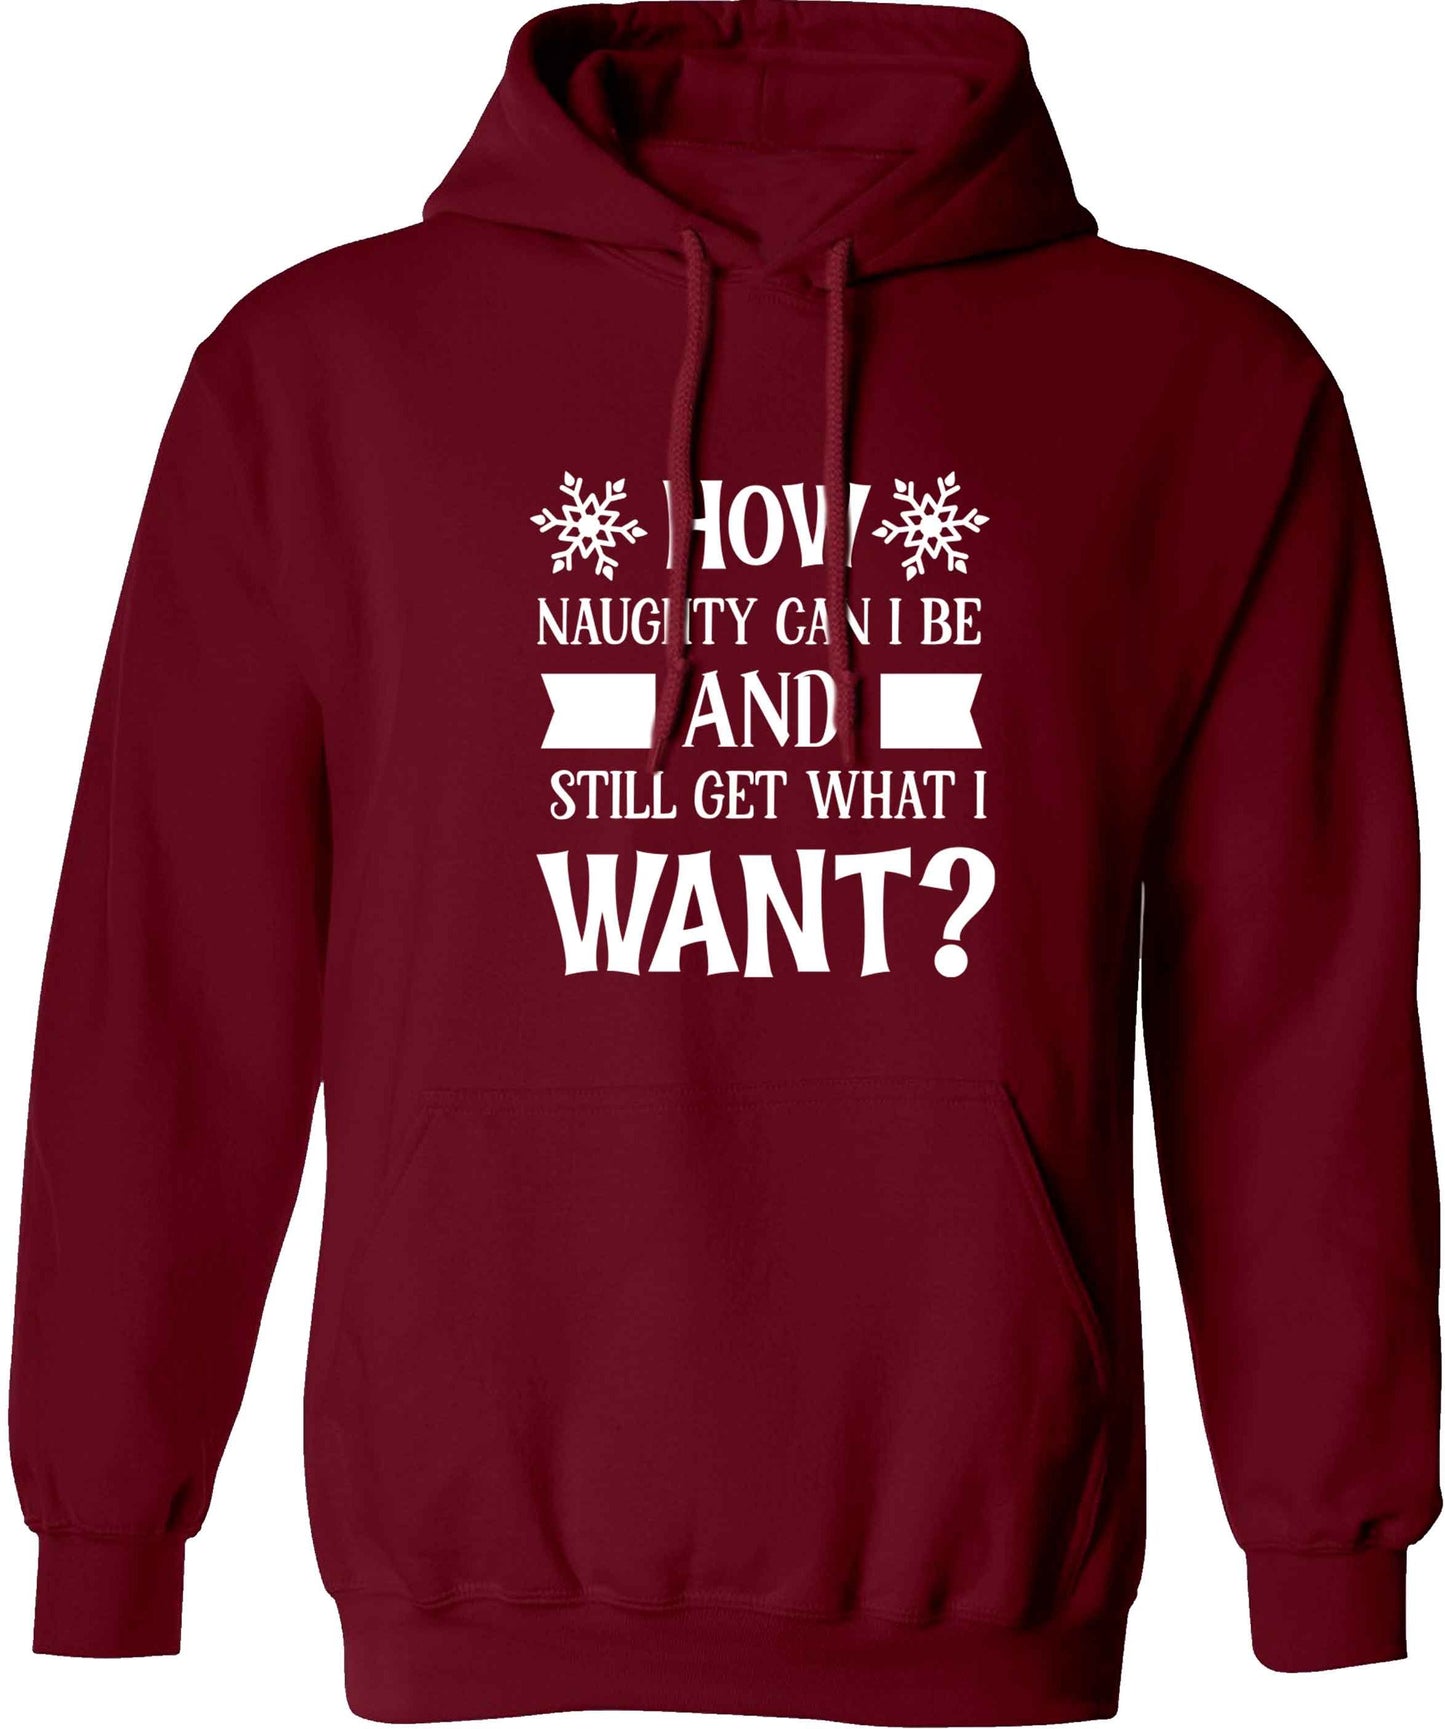 How naughty can I be and still get what I want? adults unisex maroon hoodie 2XL